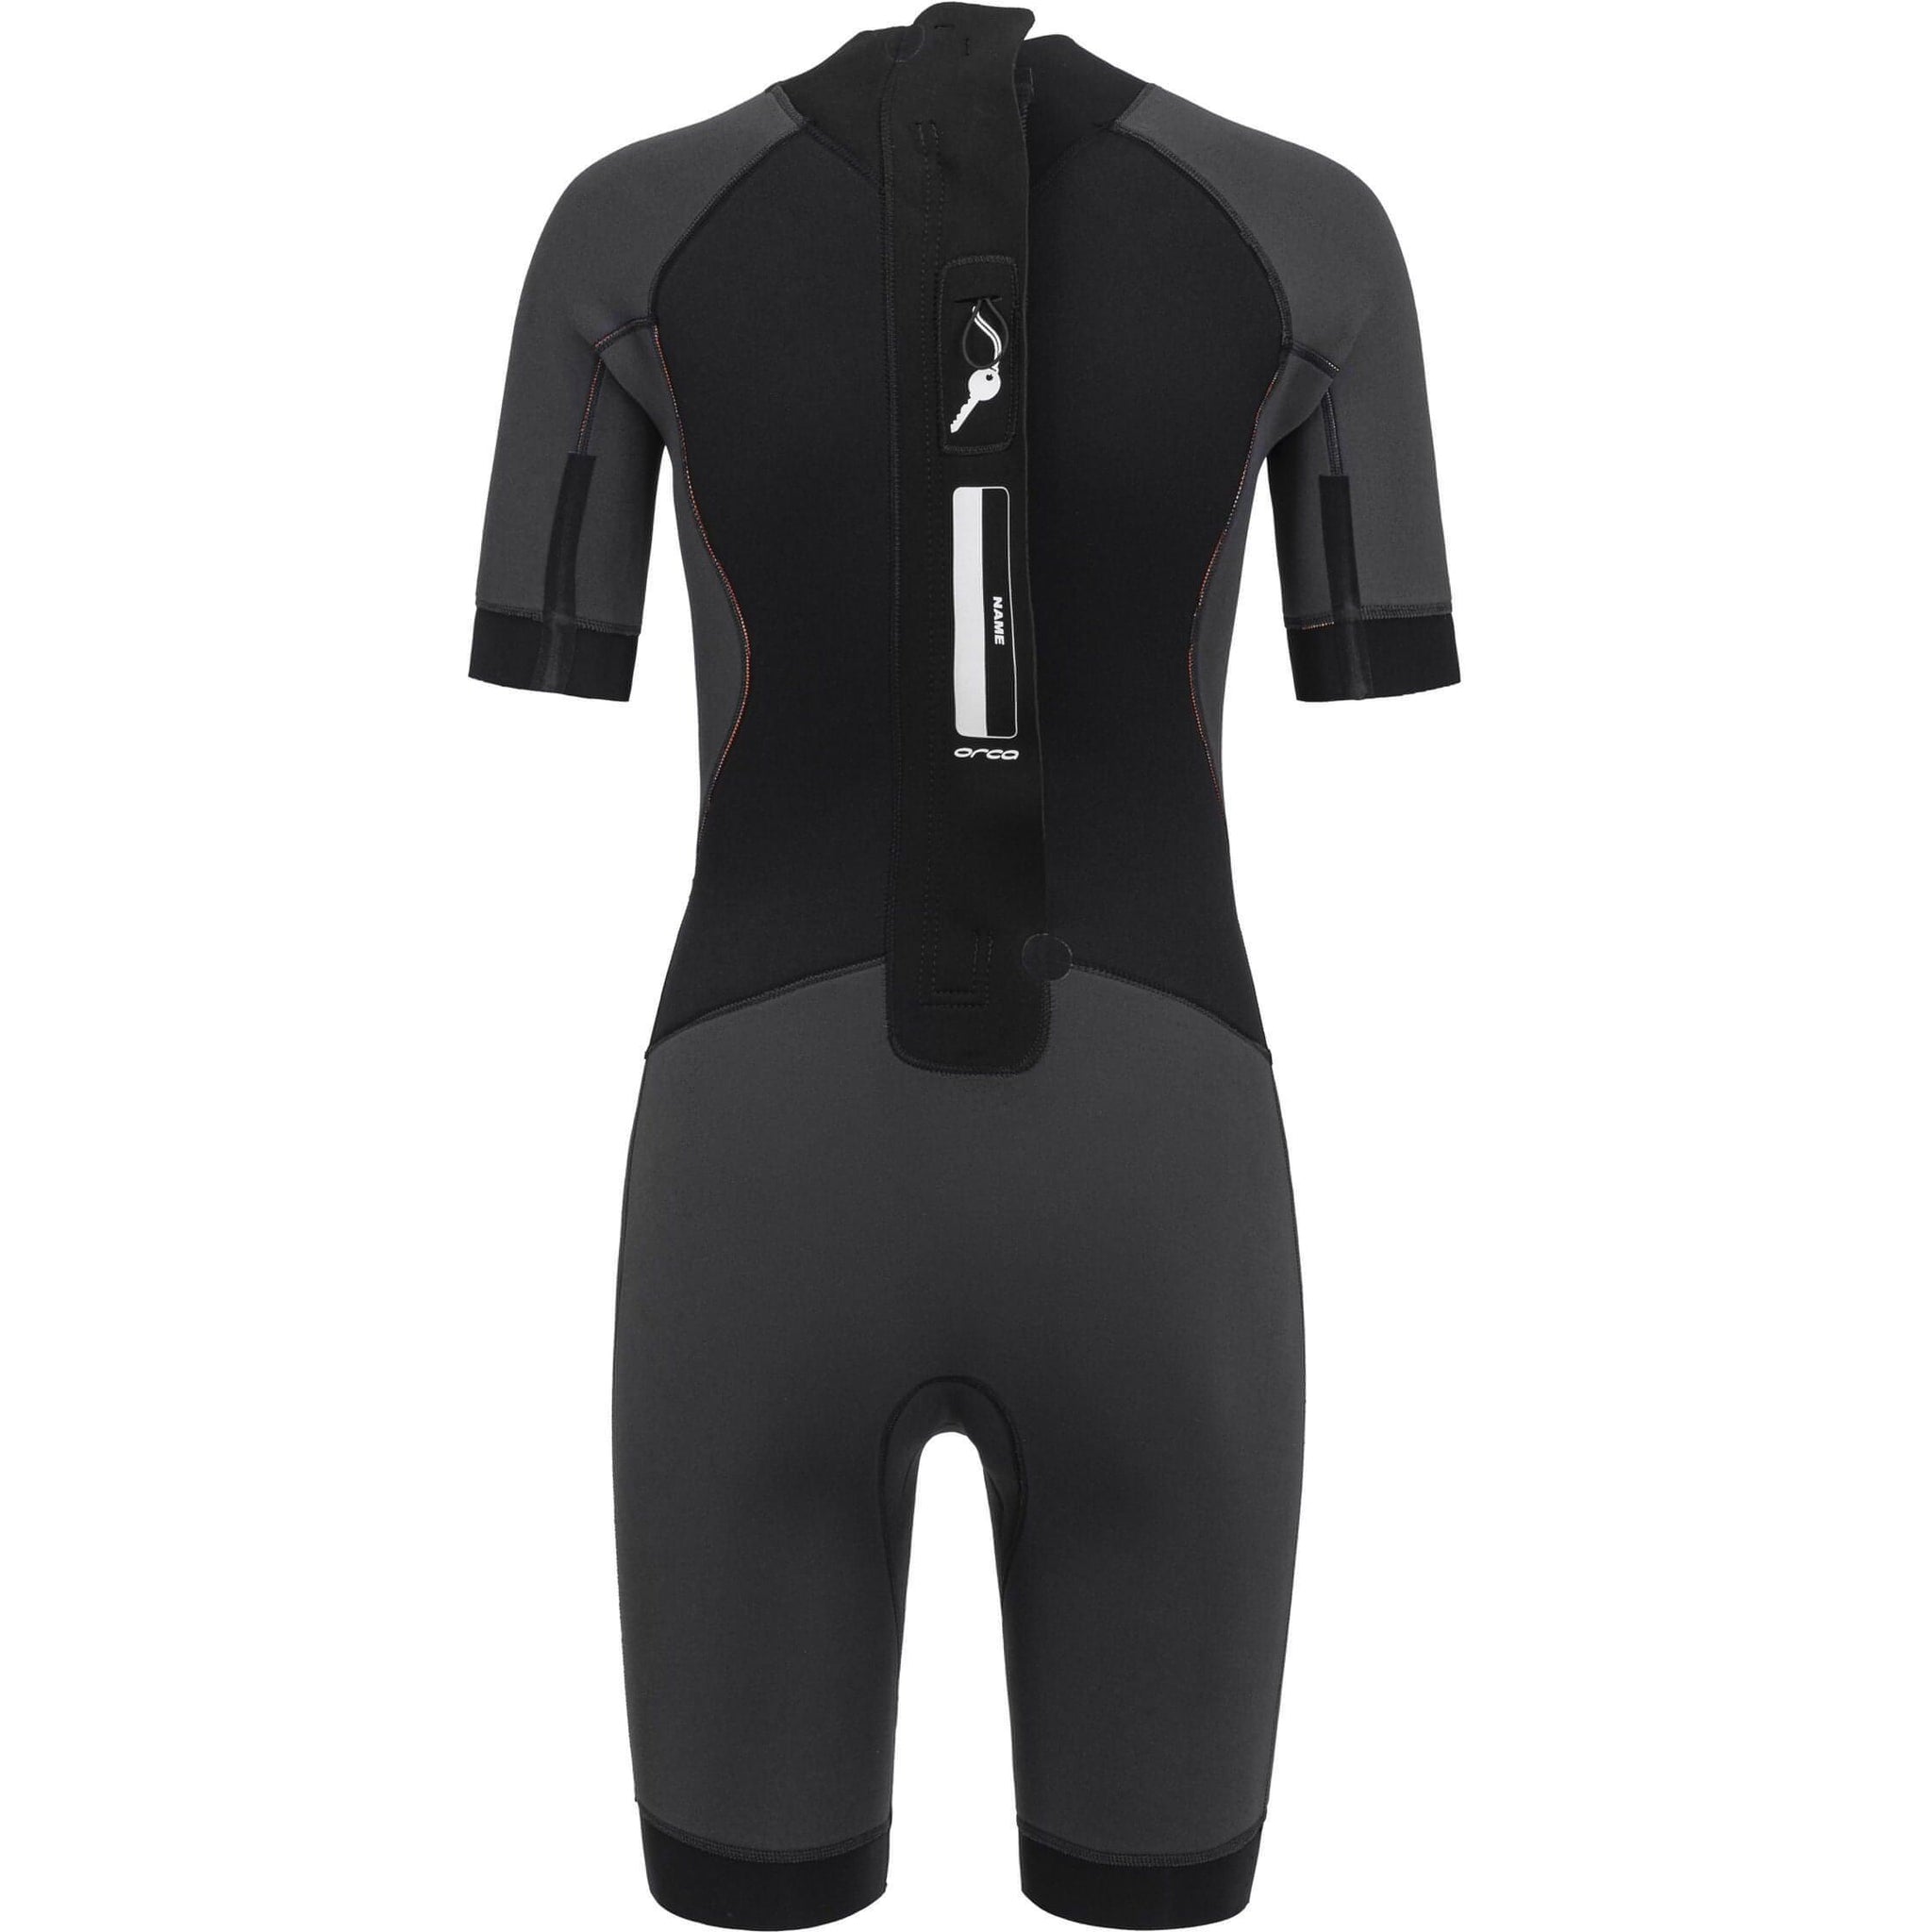 Orca Vitalis Shorty Openwater Womens Wetsuit - Black